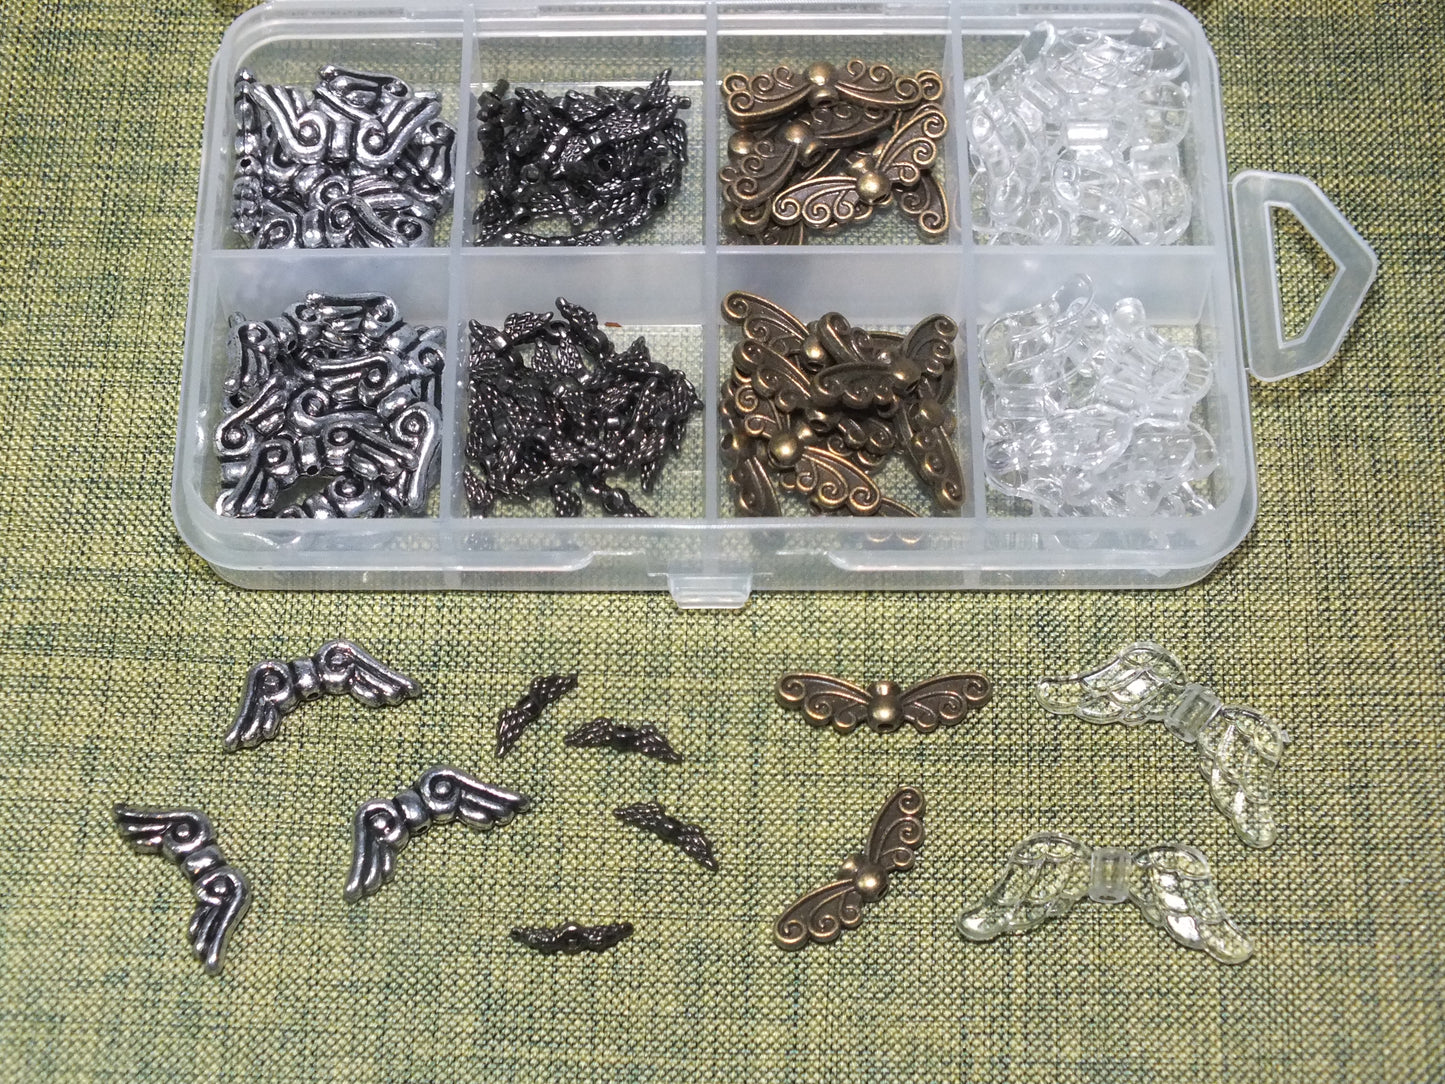 110pcs Angel wings spacer beads box - assorted sizes, styles & materials